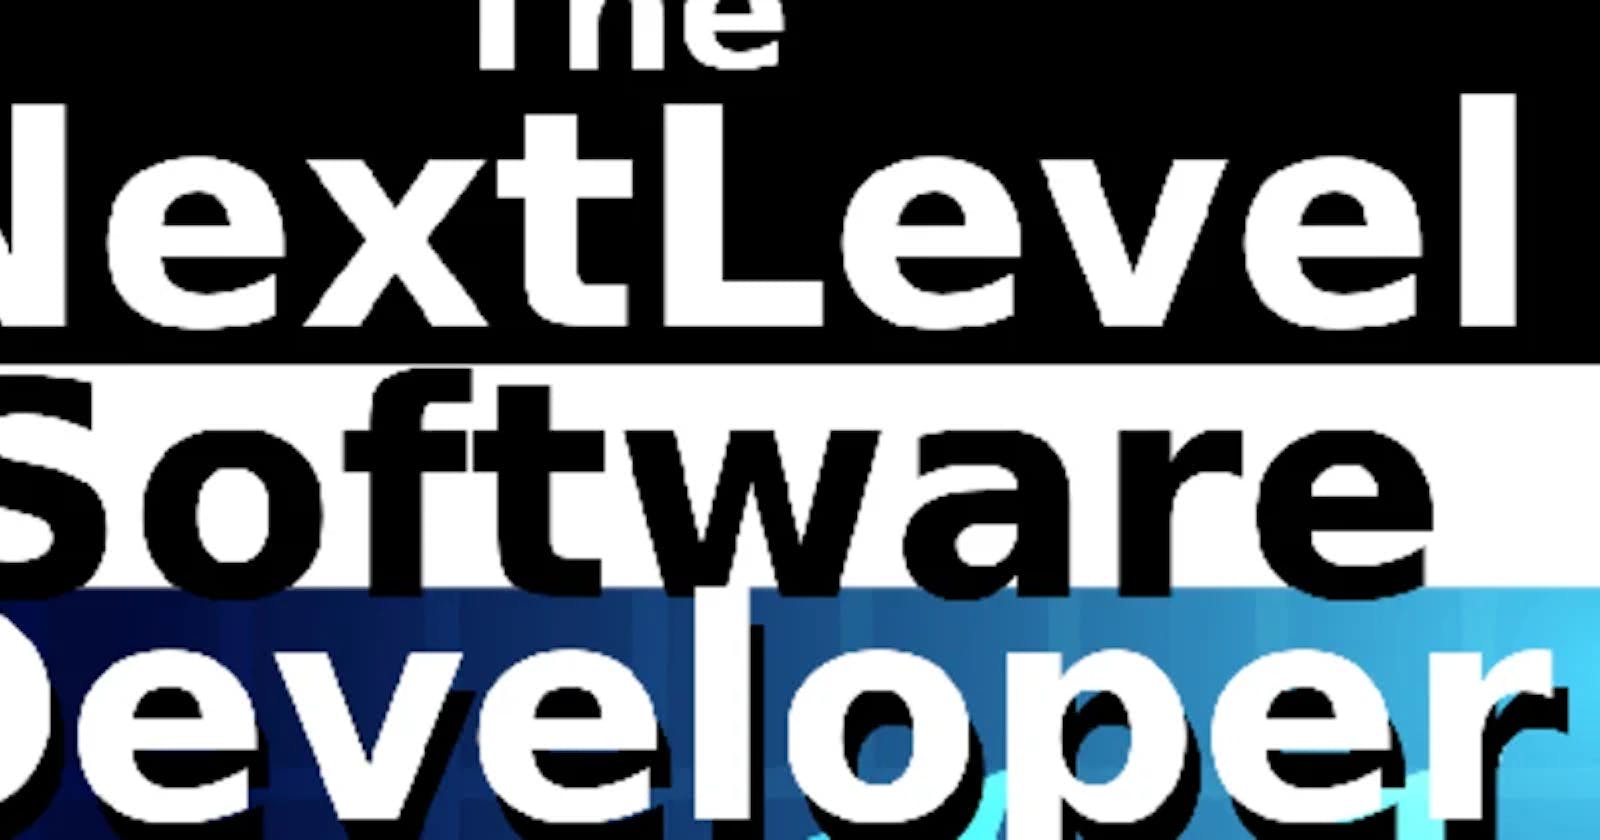 What Is a NextLevel Software Developer?